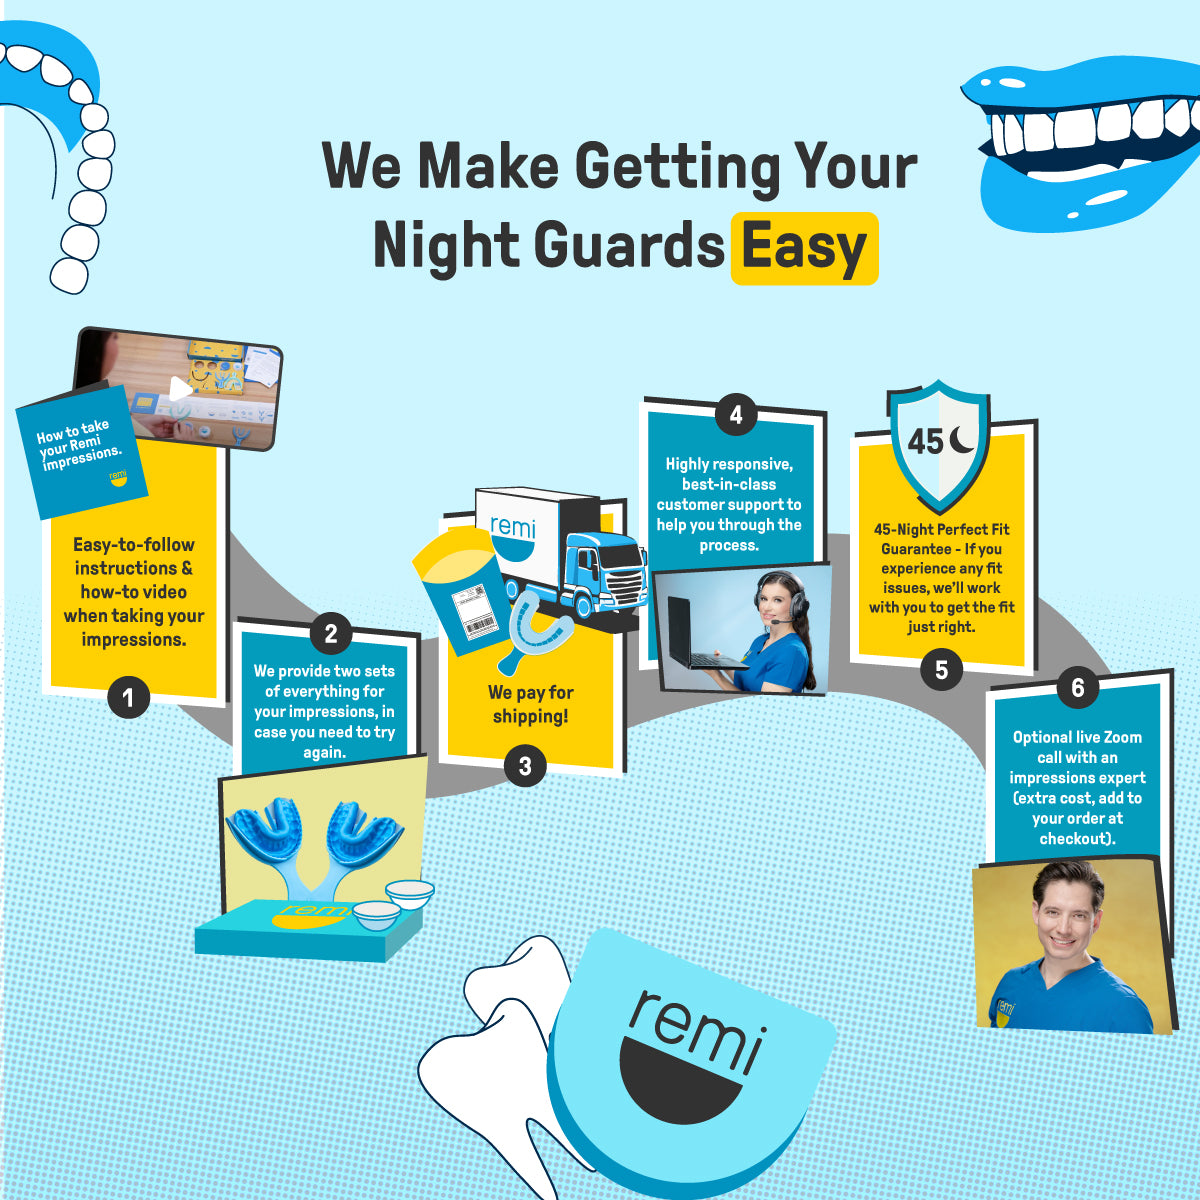 An infographic outlining the steps to order Custom Night Guards, highlighting the process, customer support, and satisfaction guarantee. Images of products, instructions, and customer service are included to help alleviate jaw pain with ease.